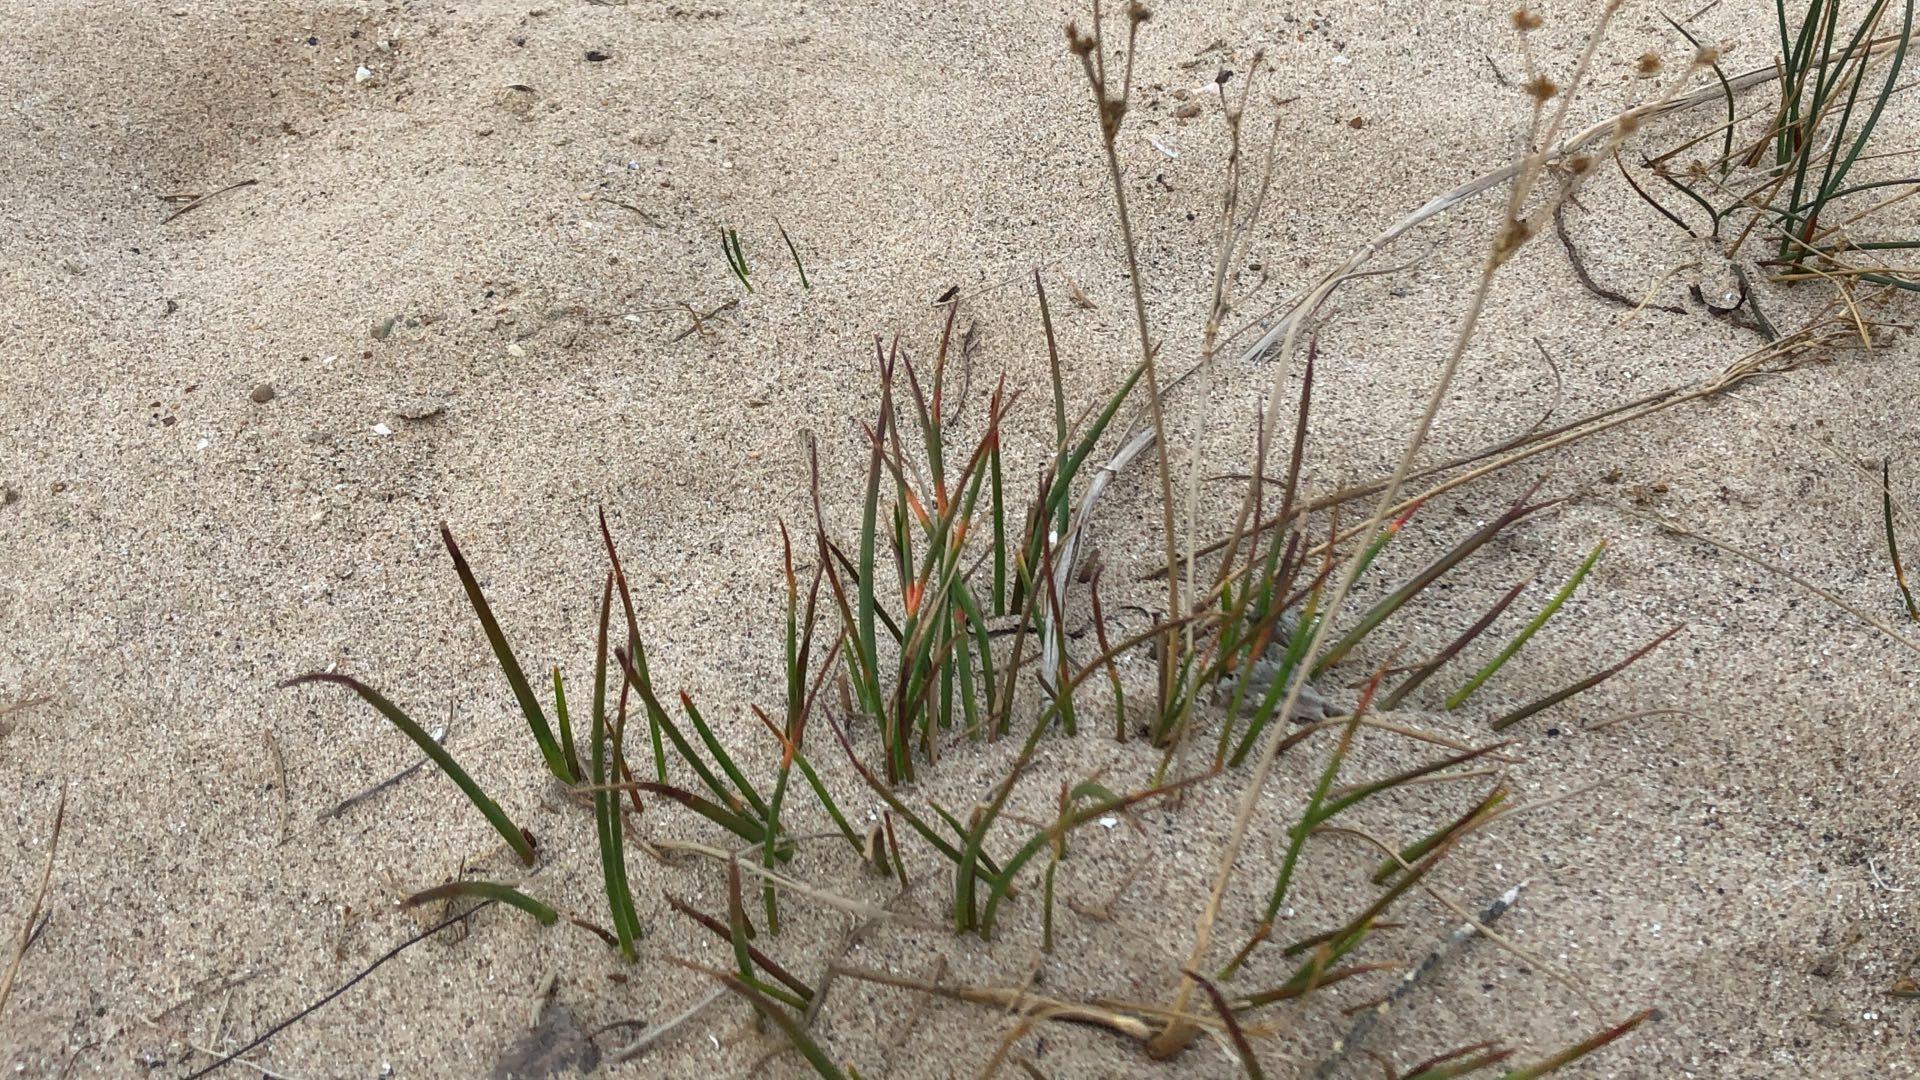 Vegetation emerging in the spring at Montrose Dune Natural Area. (Patty Wetli / WTTW News)